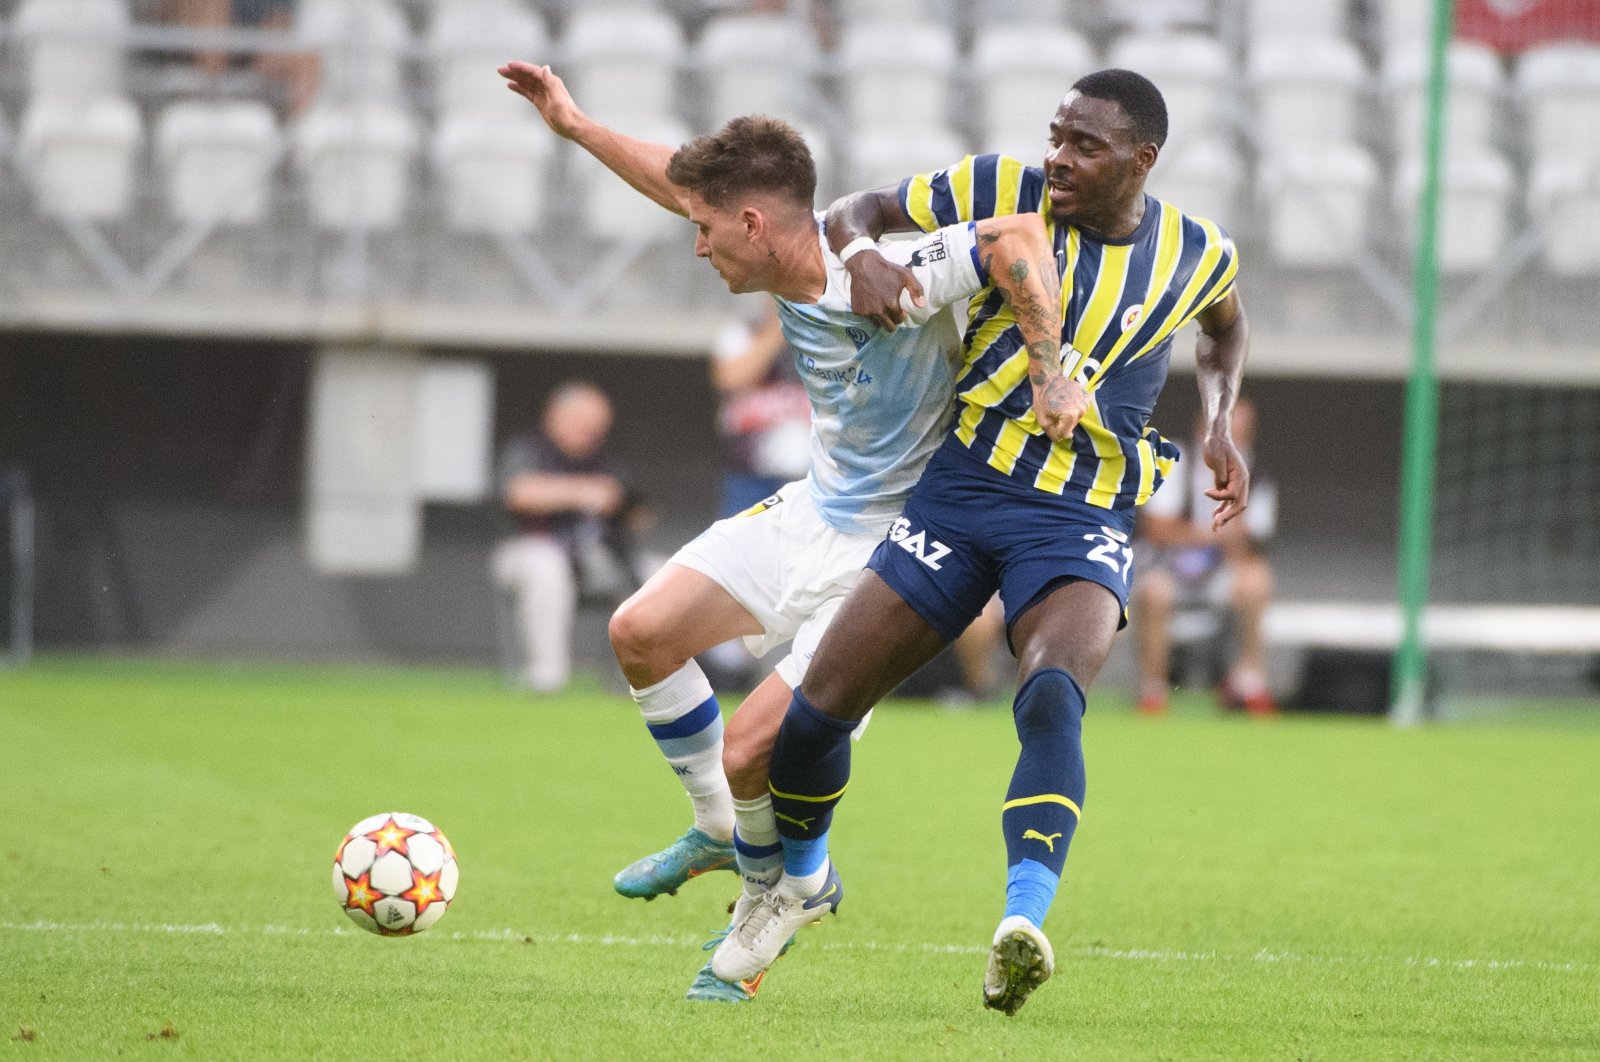  Benjamin Verbic of Dynamo Kyiv and Osai-Samuel of Fenerbahçe in action during the UEFA Champions League qualifier first leg match in Lodz, Poland, July 20, 2022.  (EPA Photo)